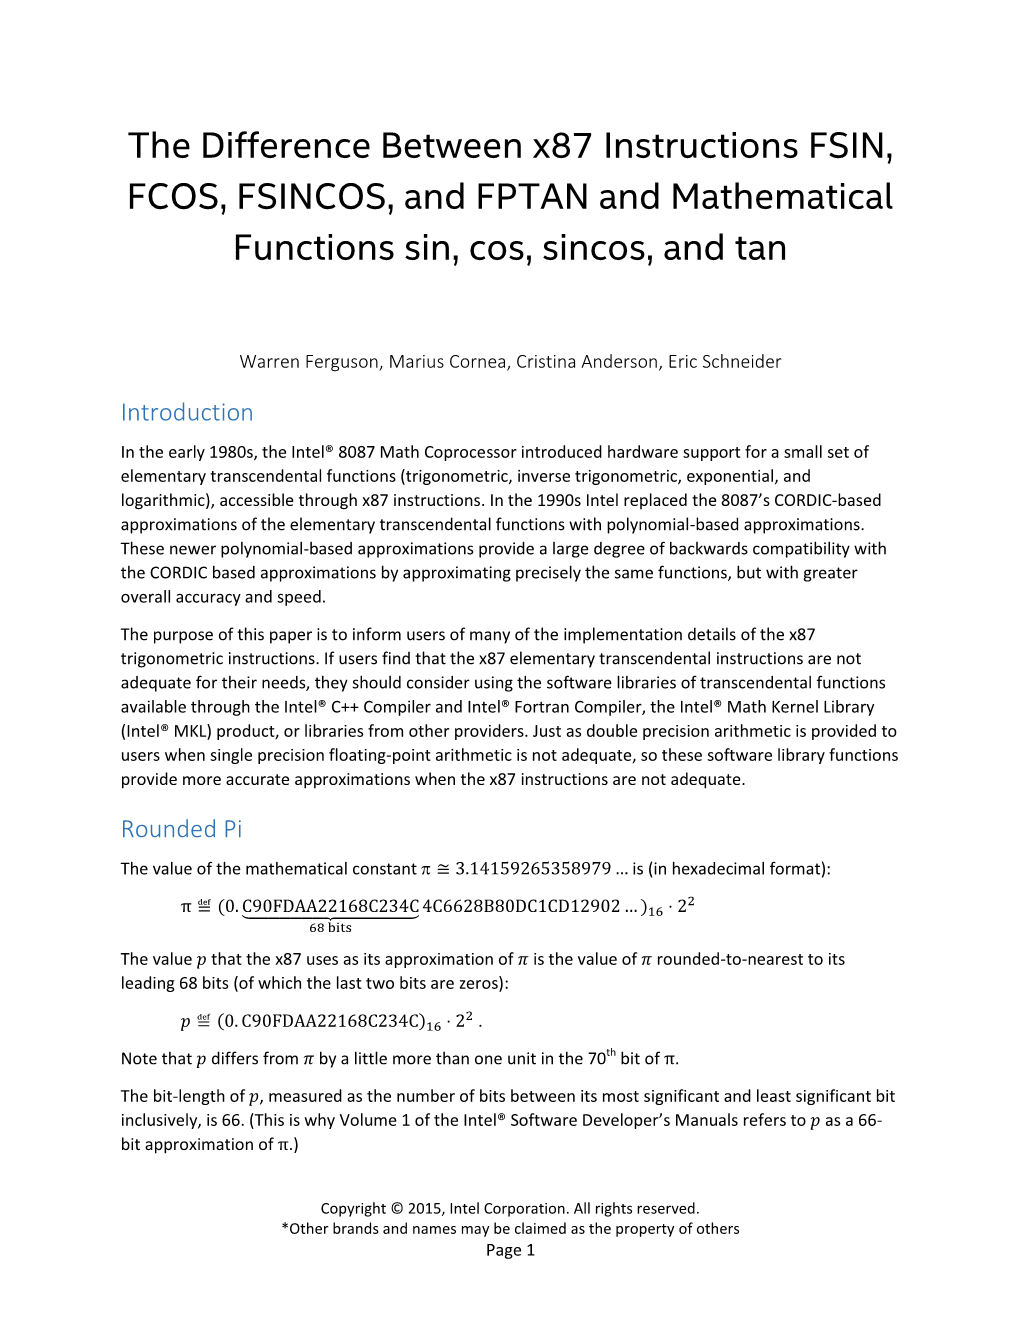 The Difference Between X87 Instructions FSIN, FCOS, FSINCOS, and FPTAN and Mathematical Functions Sin, Cos, Sincos, and Tan